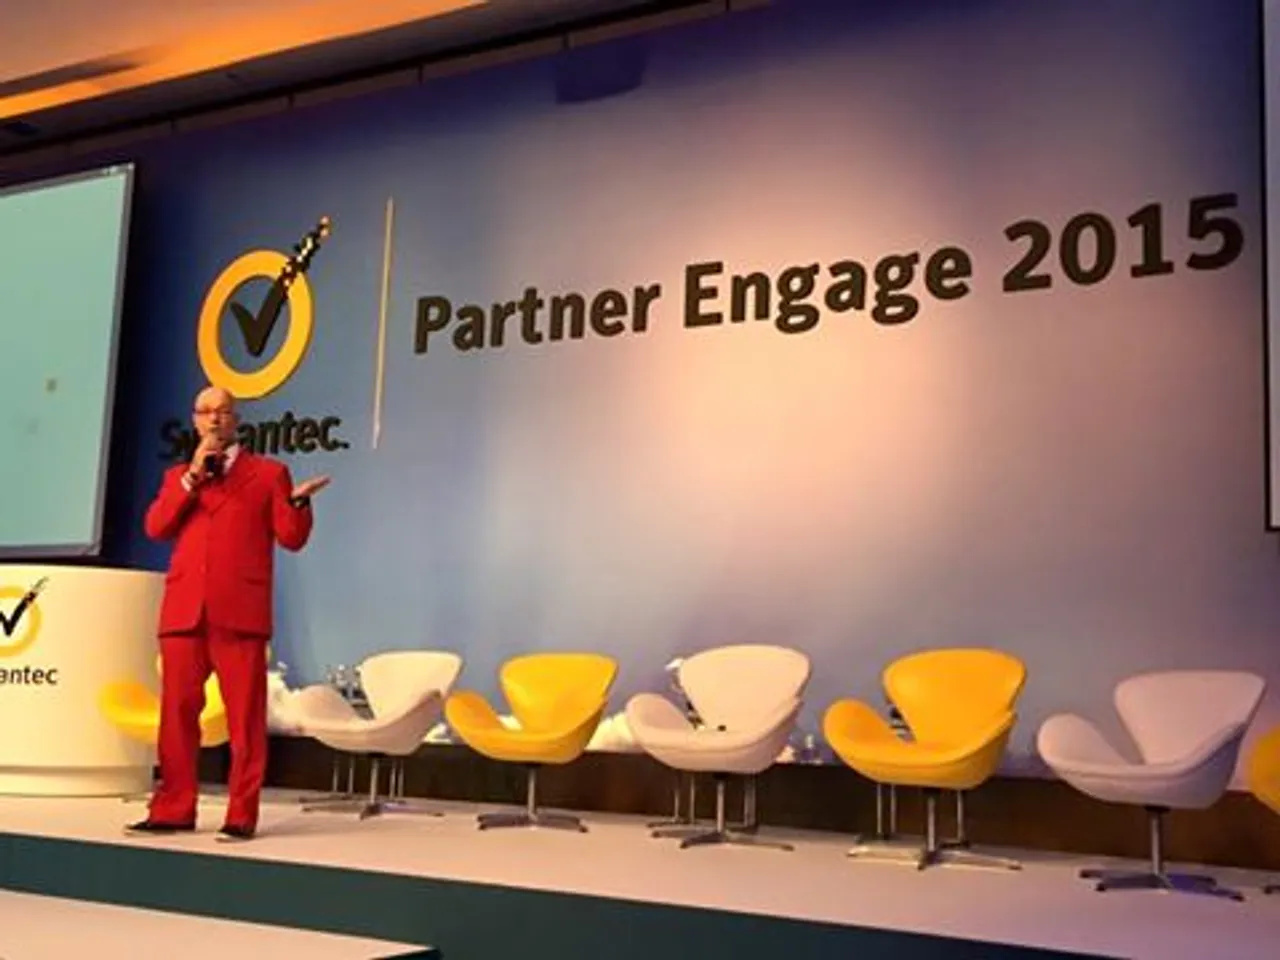 Symantec Partner Engage 2015 Conference Commits to Advancing Security, Together